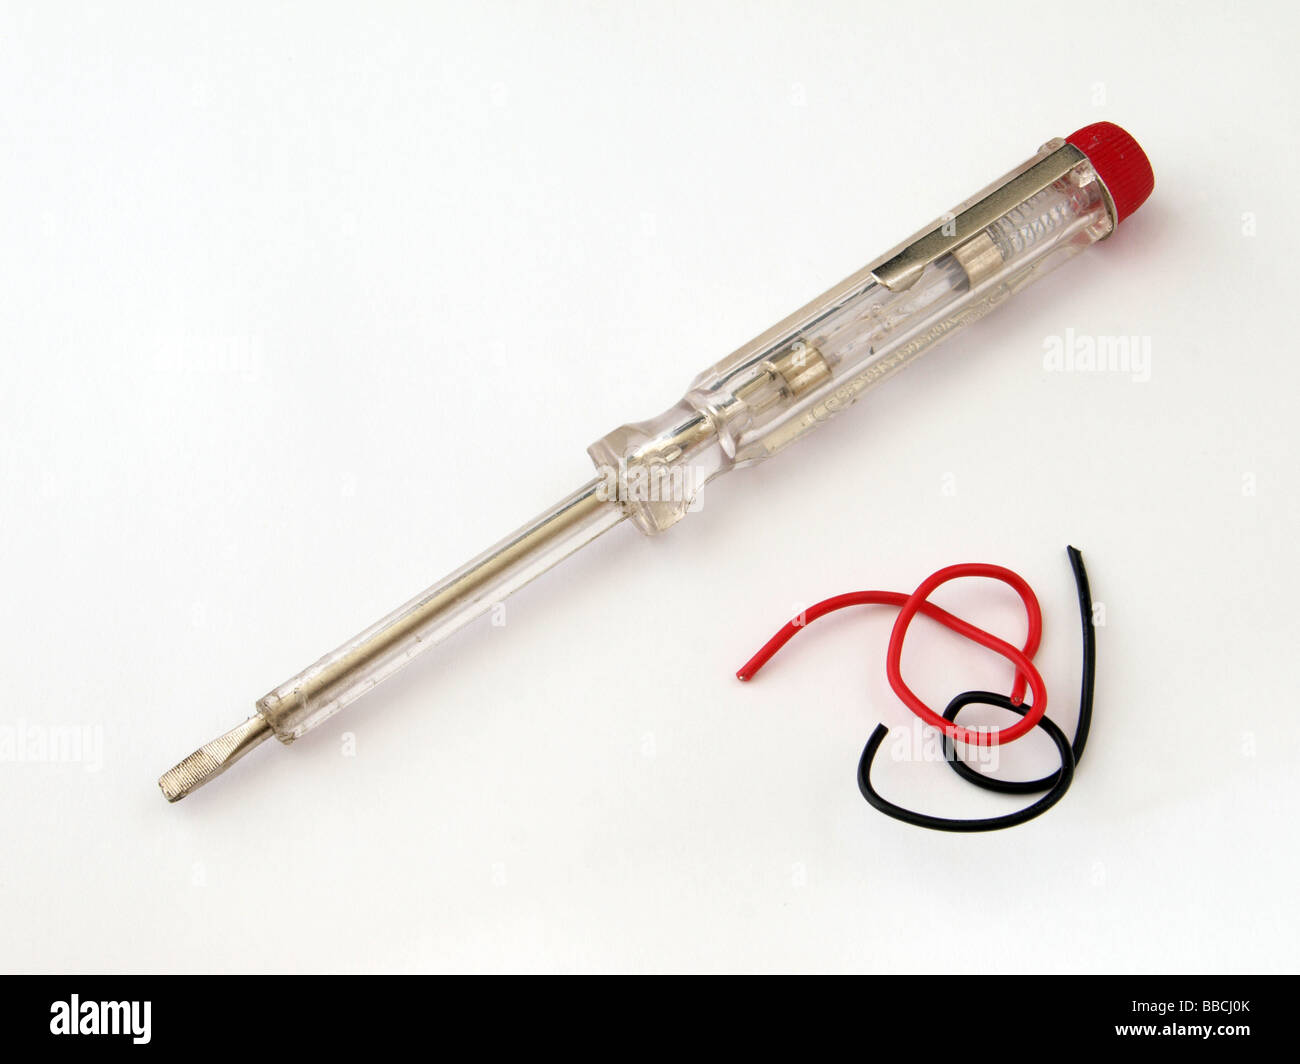 Electrical screw driver with red and black wire Stock Photo